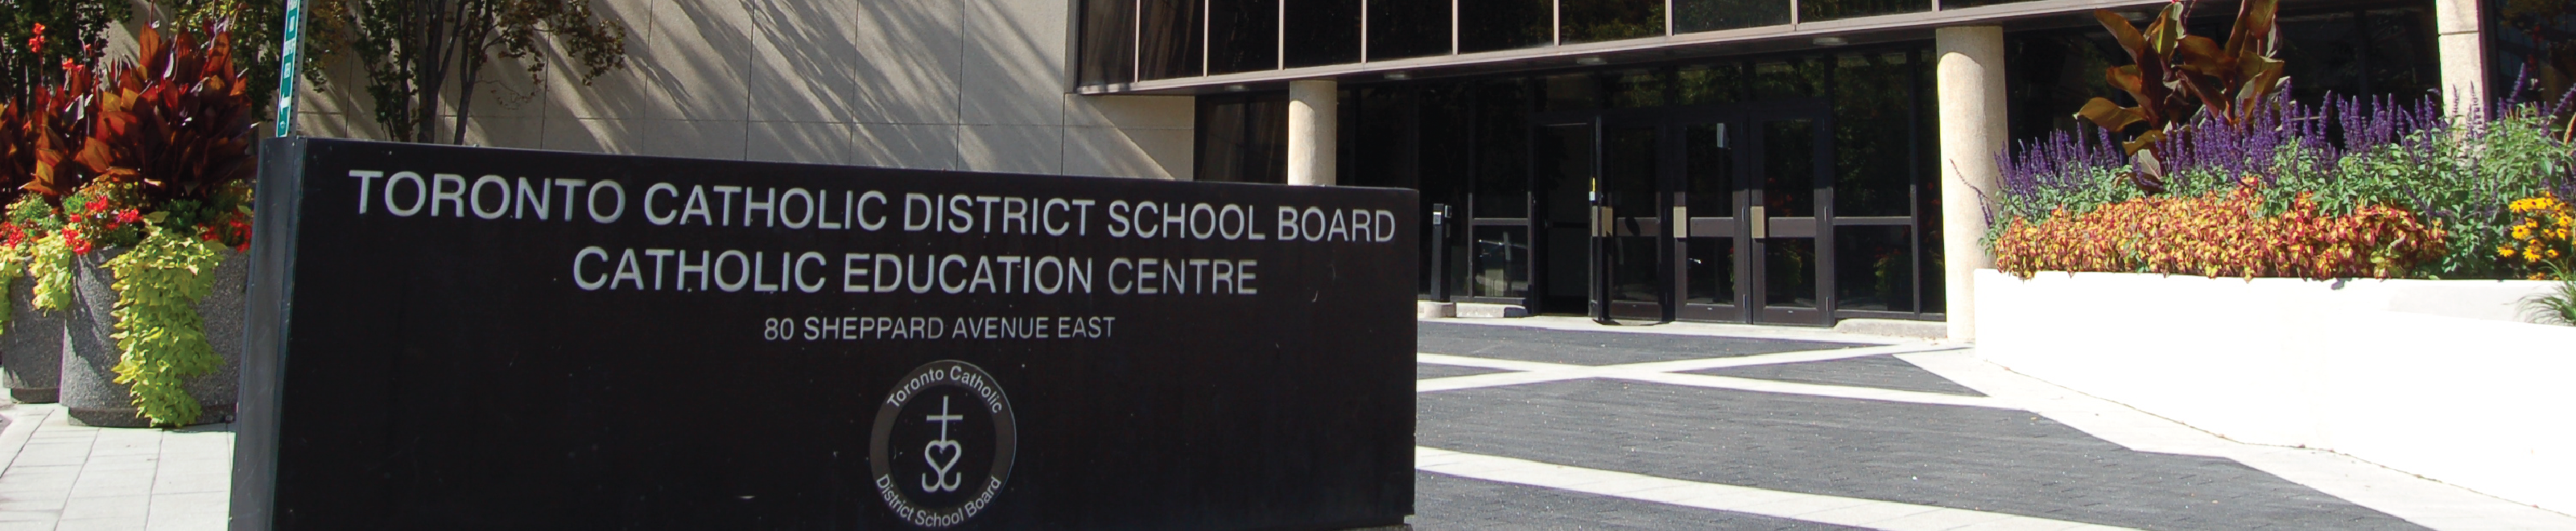 Image of the Toronto Catholic District School Board main office building.